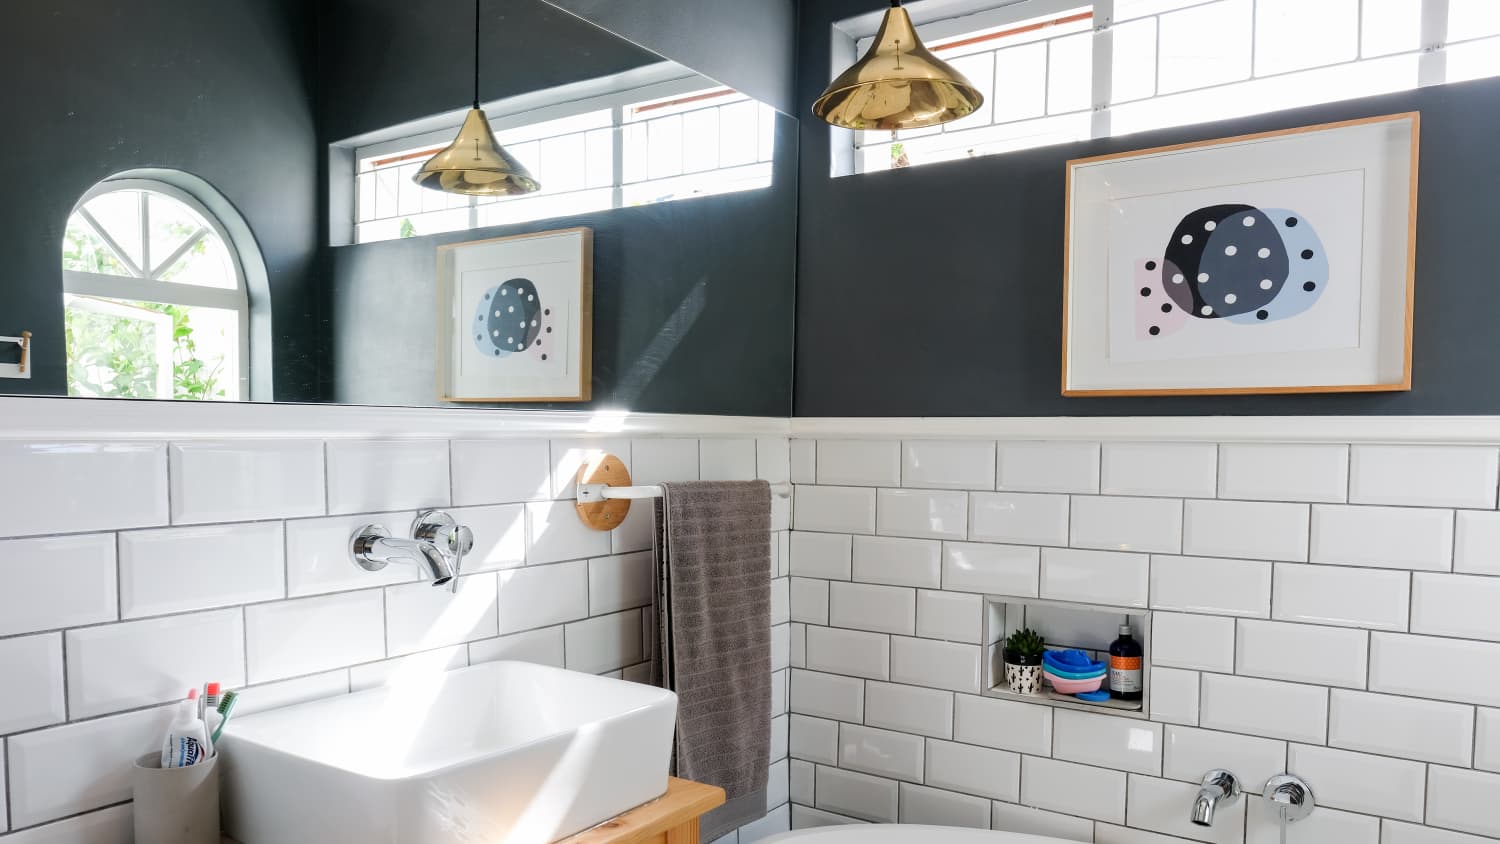 A black toilet? This unconventional choice is a bathroom trend